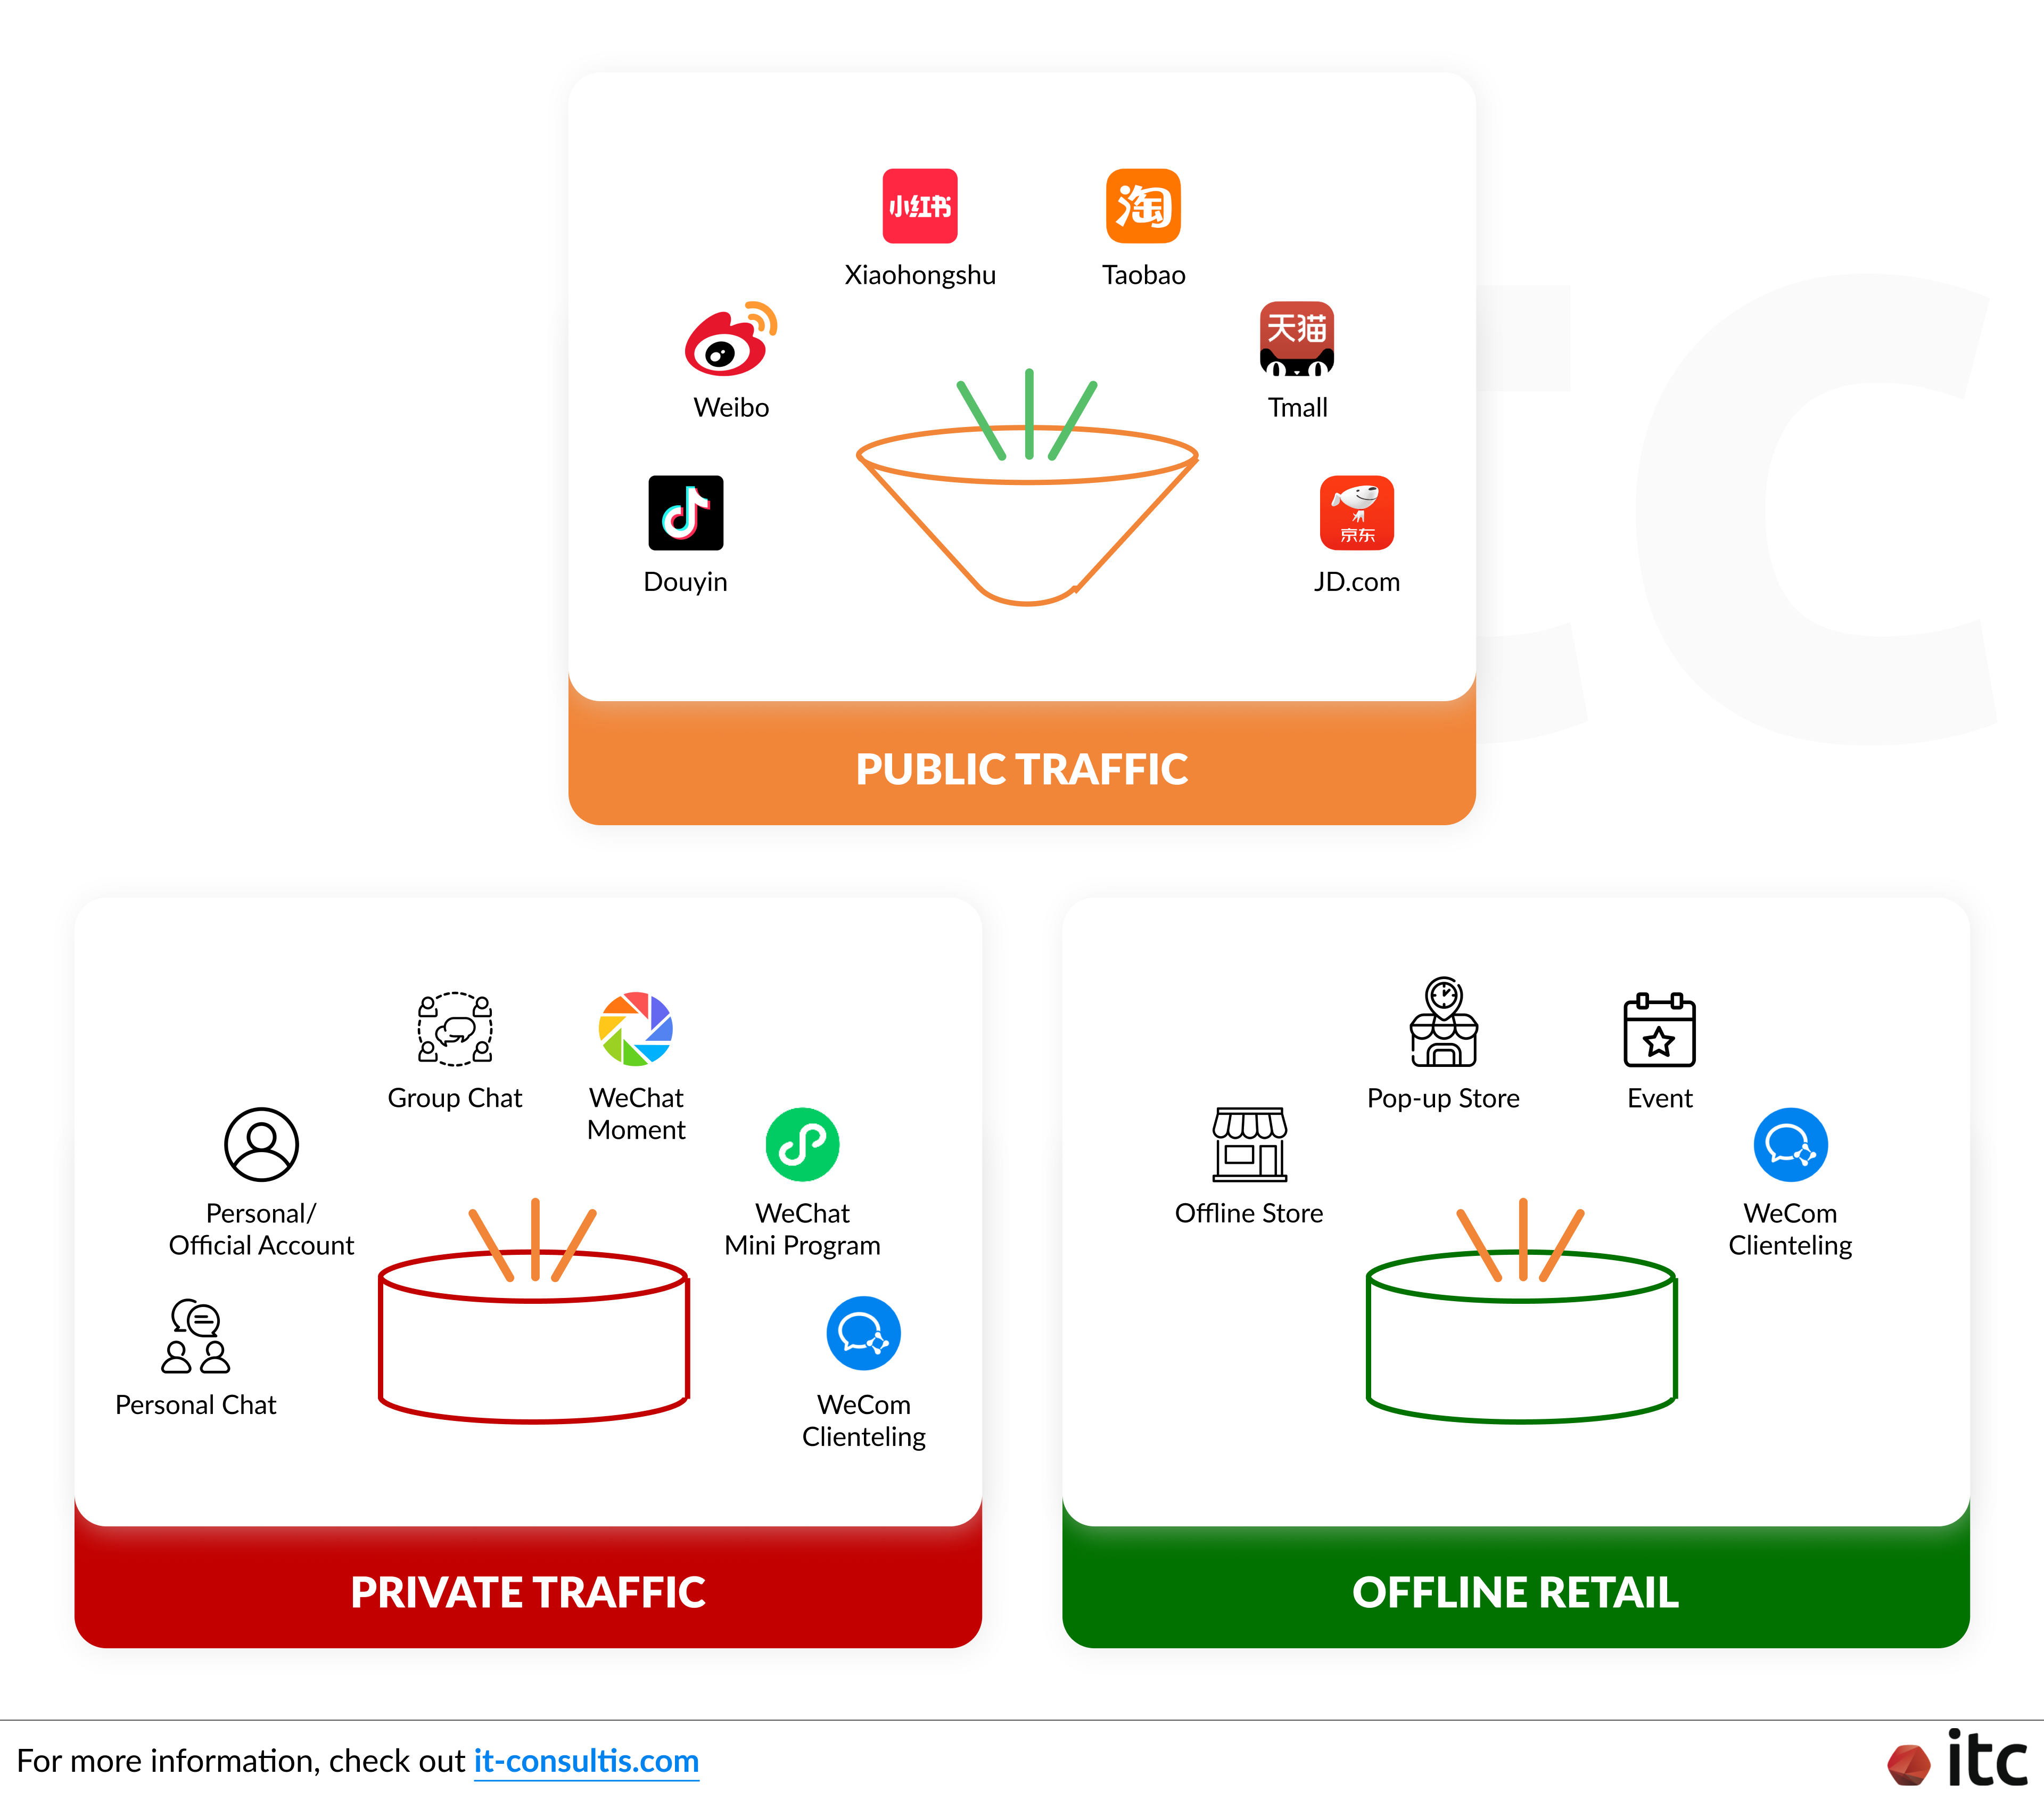 Public Traffic vs Private Traffic vs Offline Retail - the 3 key engagement funnels in China